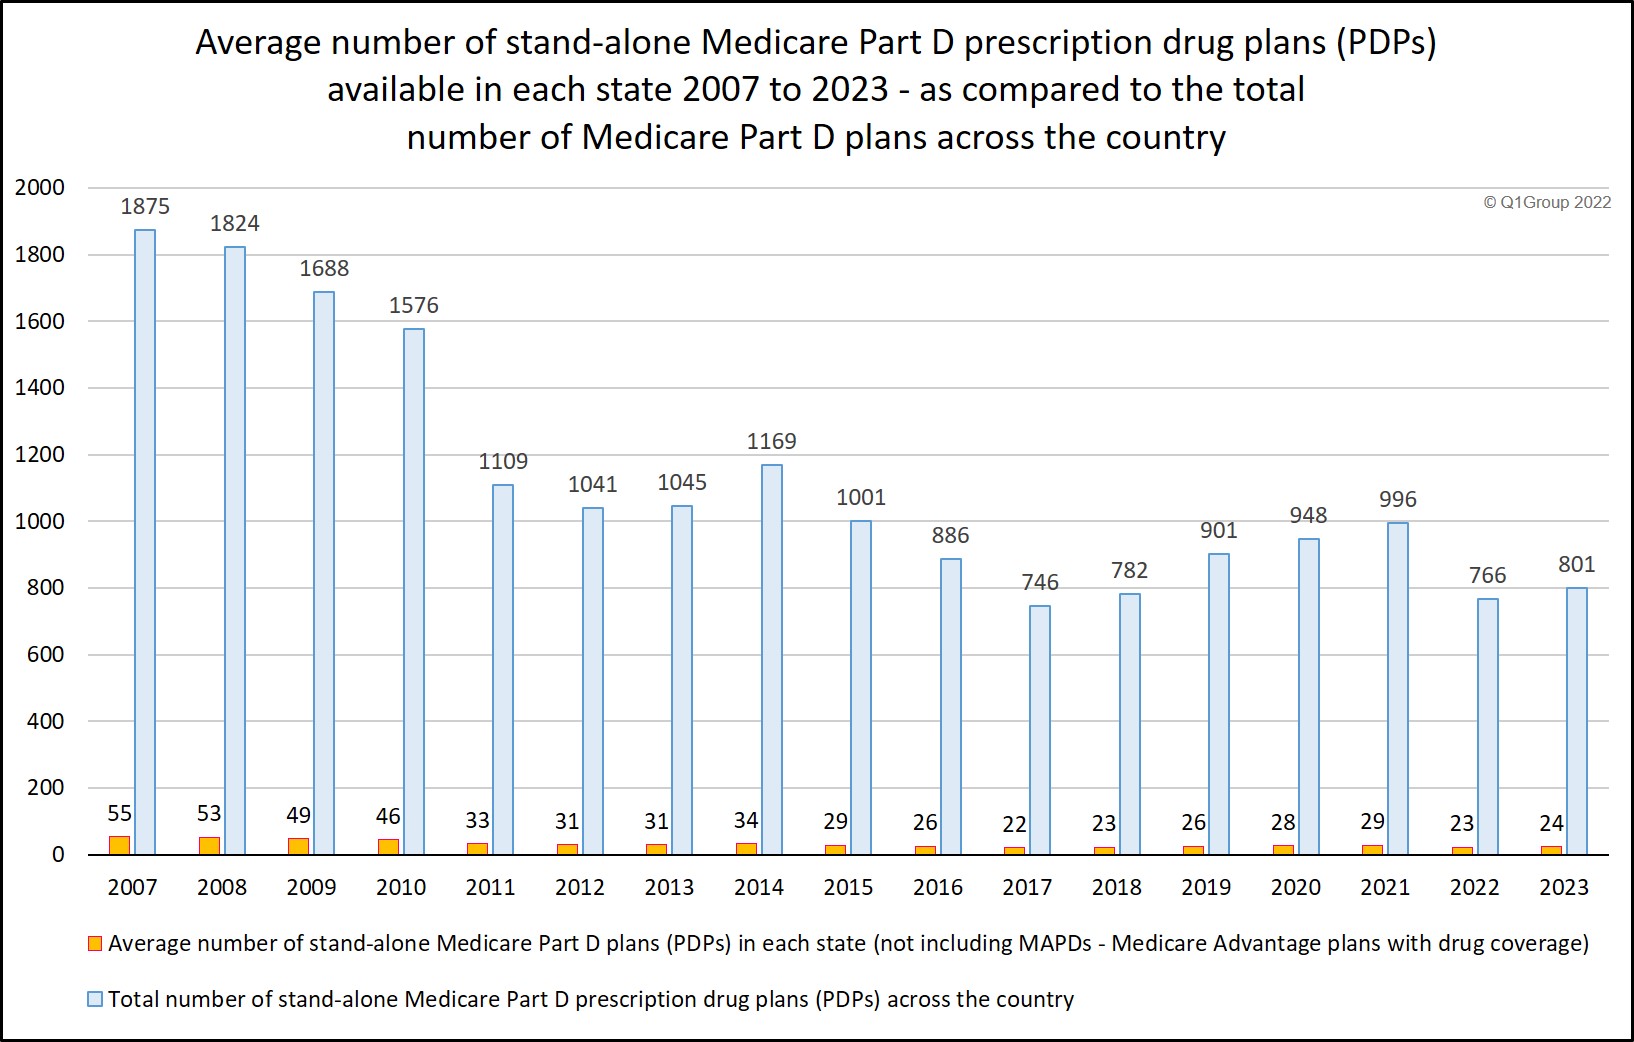 Average number of Medicare Part D plans 2007 to 2023 as compared to the total number of PDPs across the country